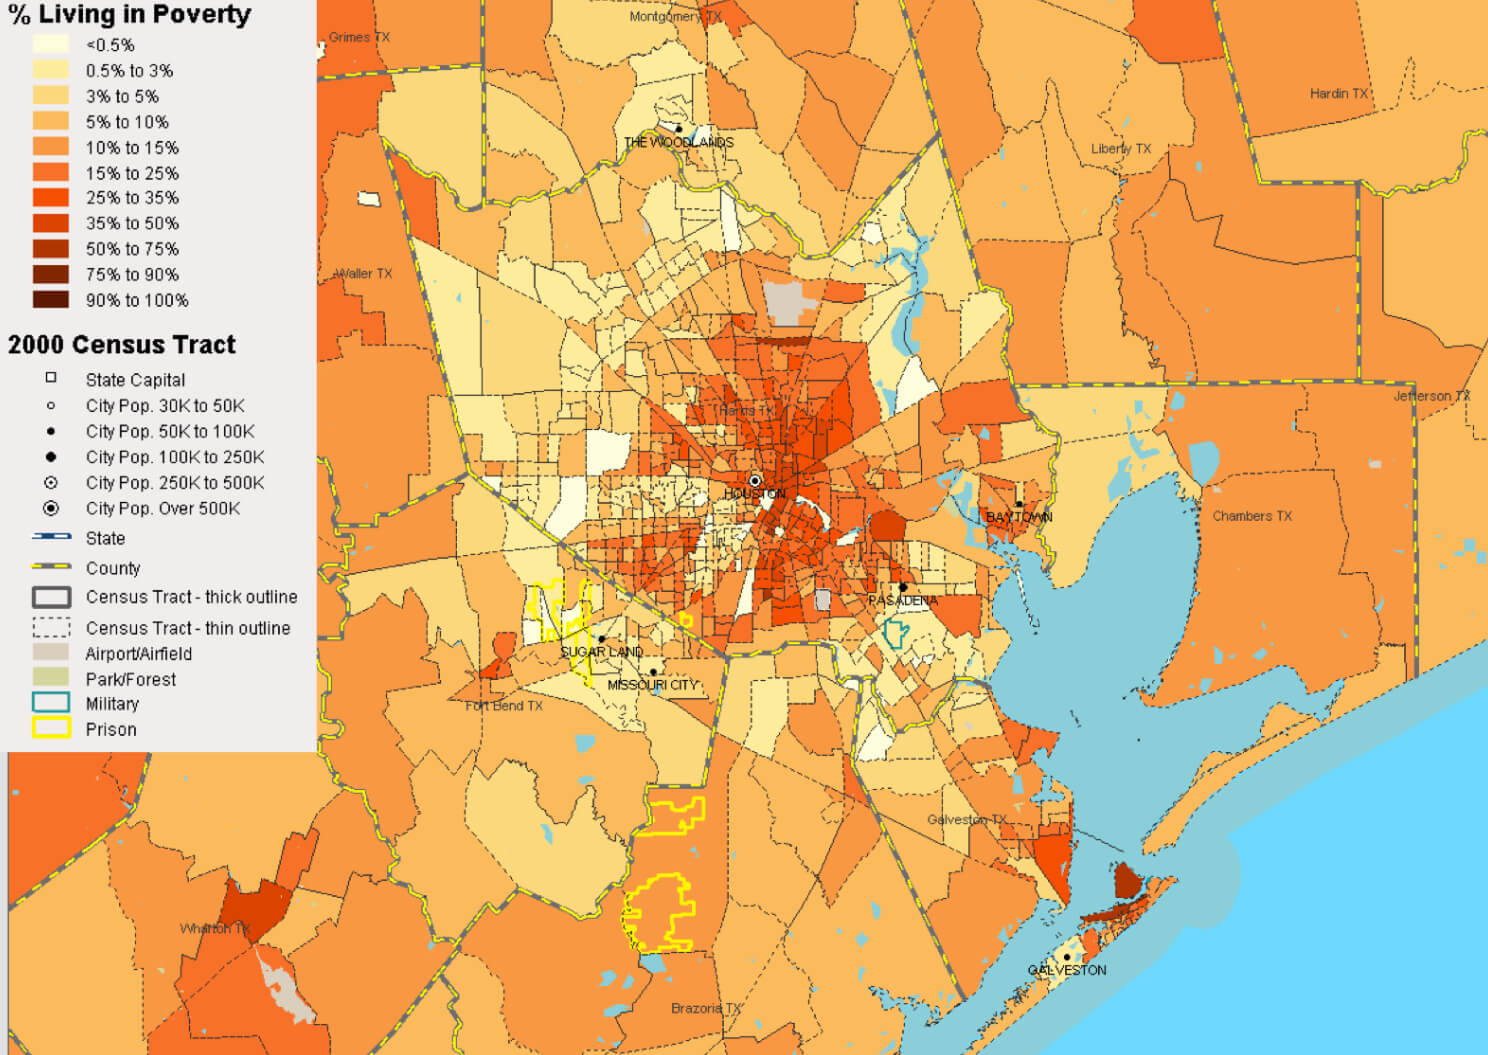 Houston Living in Poverty Map